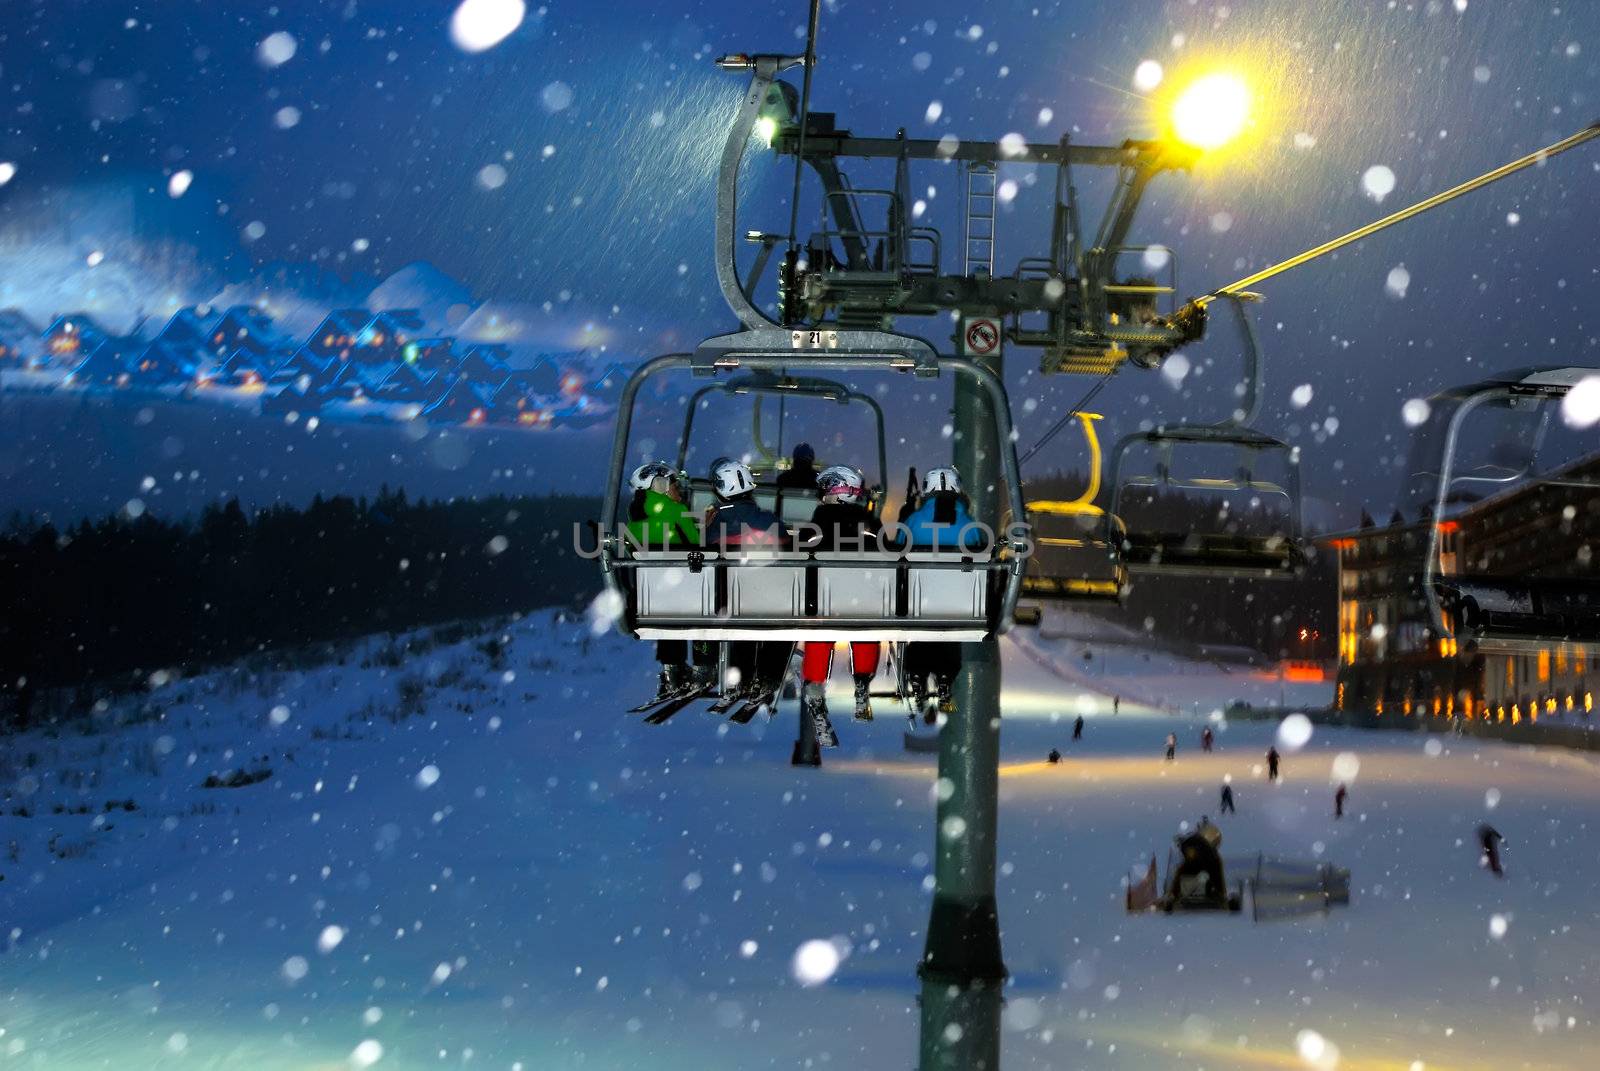 people ride in the chairlift at night by makspogonii